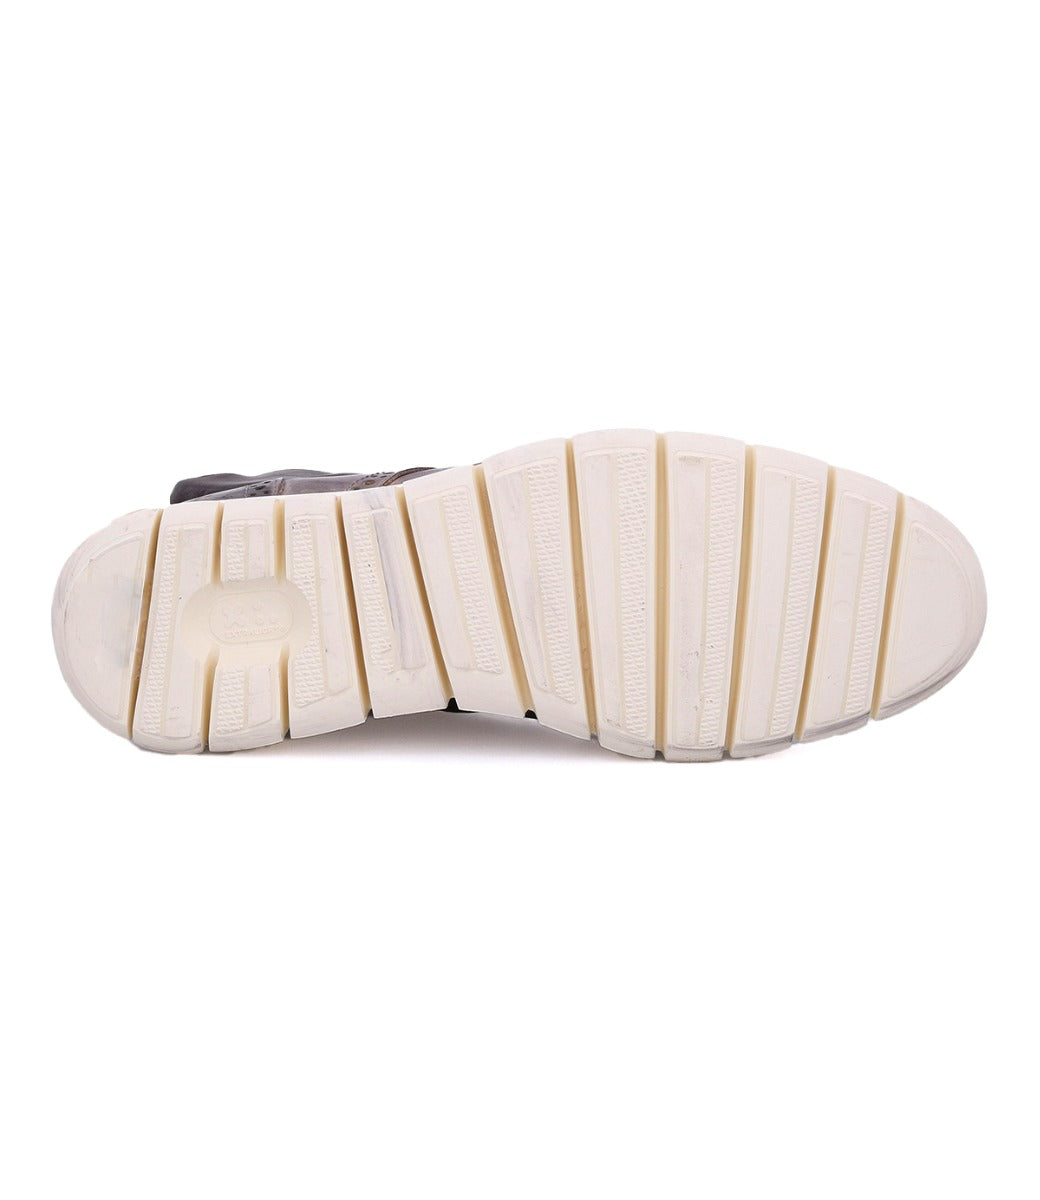 A pair of Bed Stu Bowery II men's shoes with white soles on a white background.